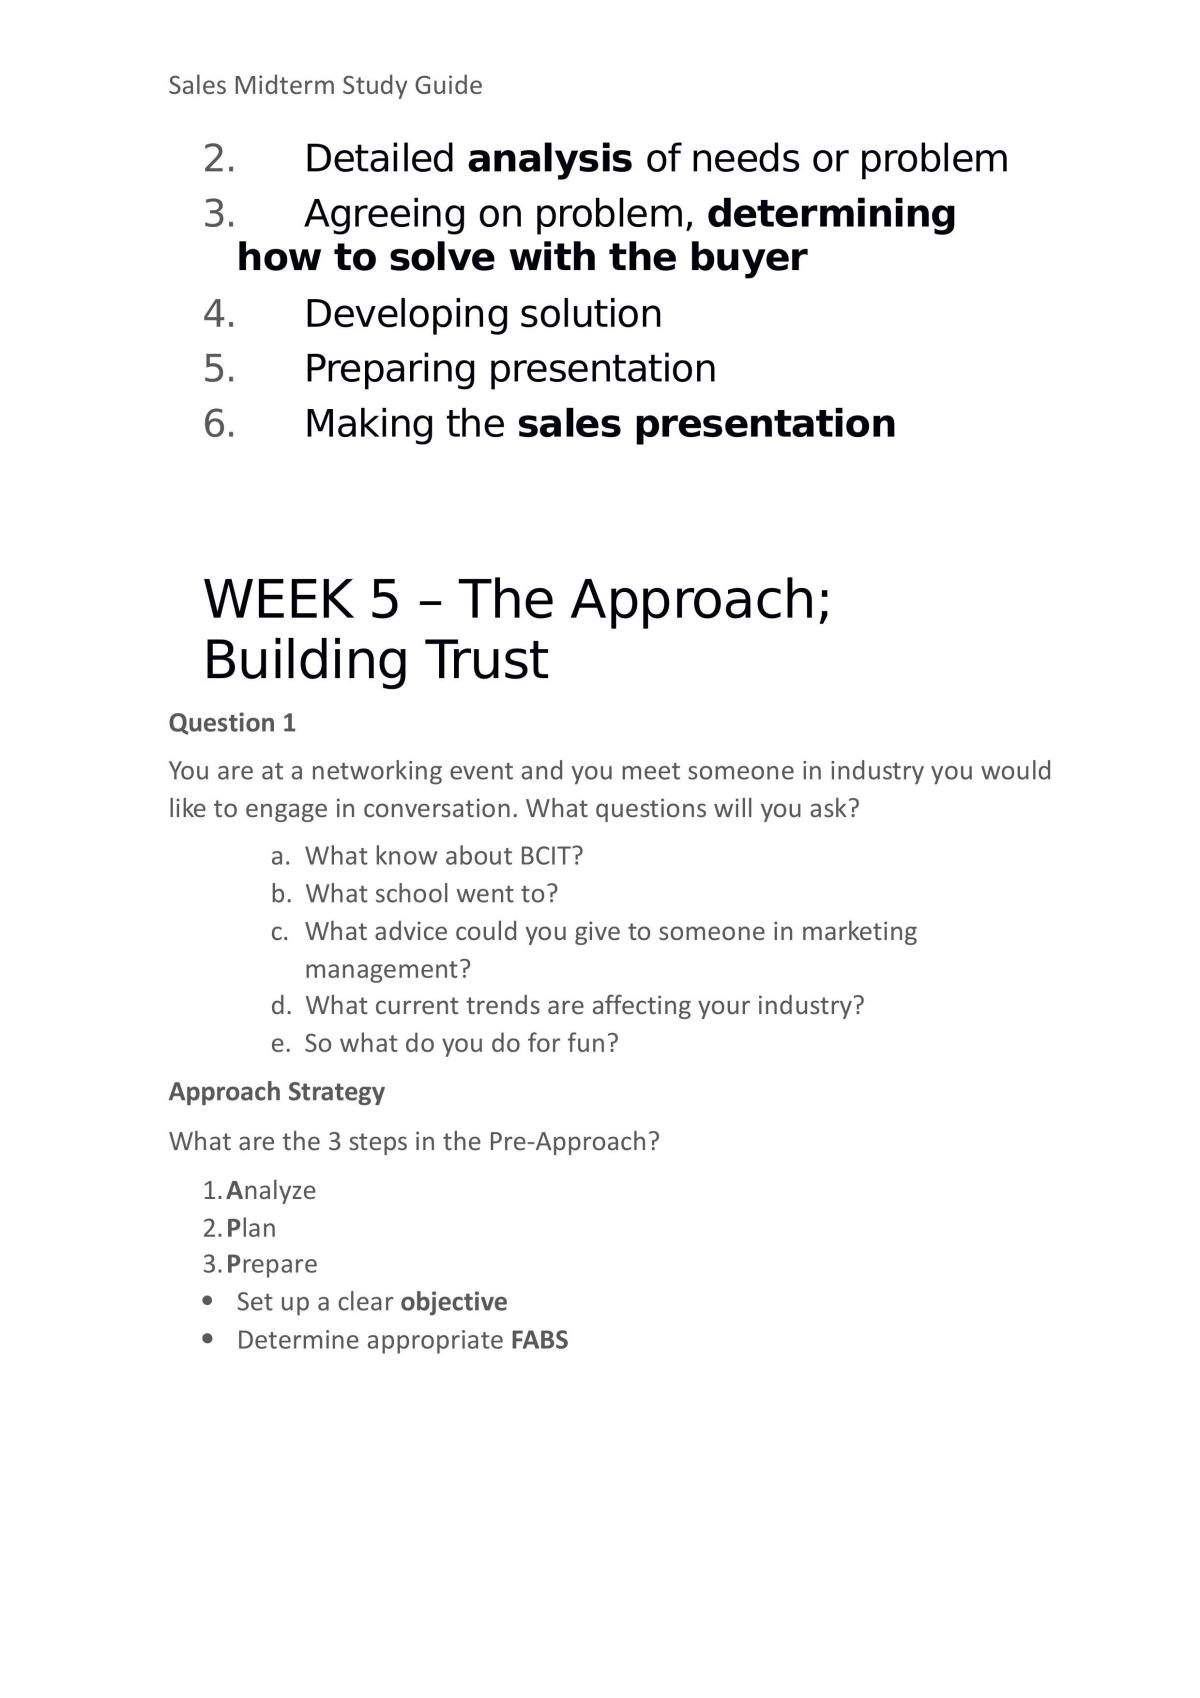 Sales Skills Guide for Finals - Page 17